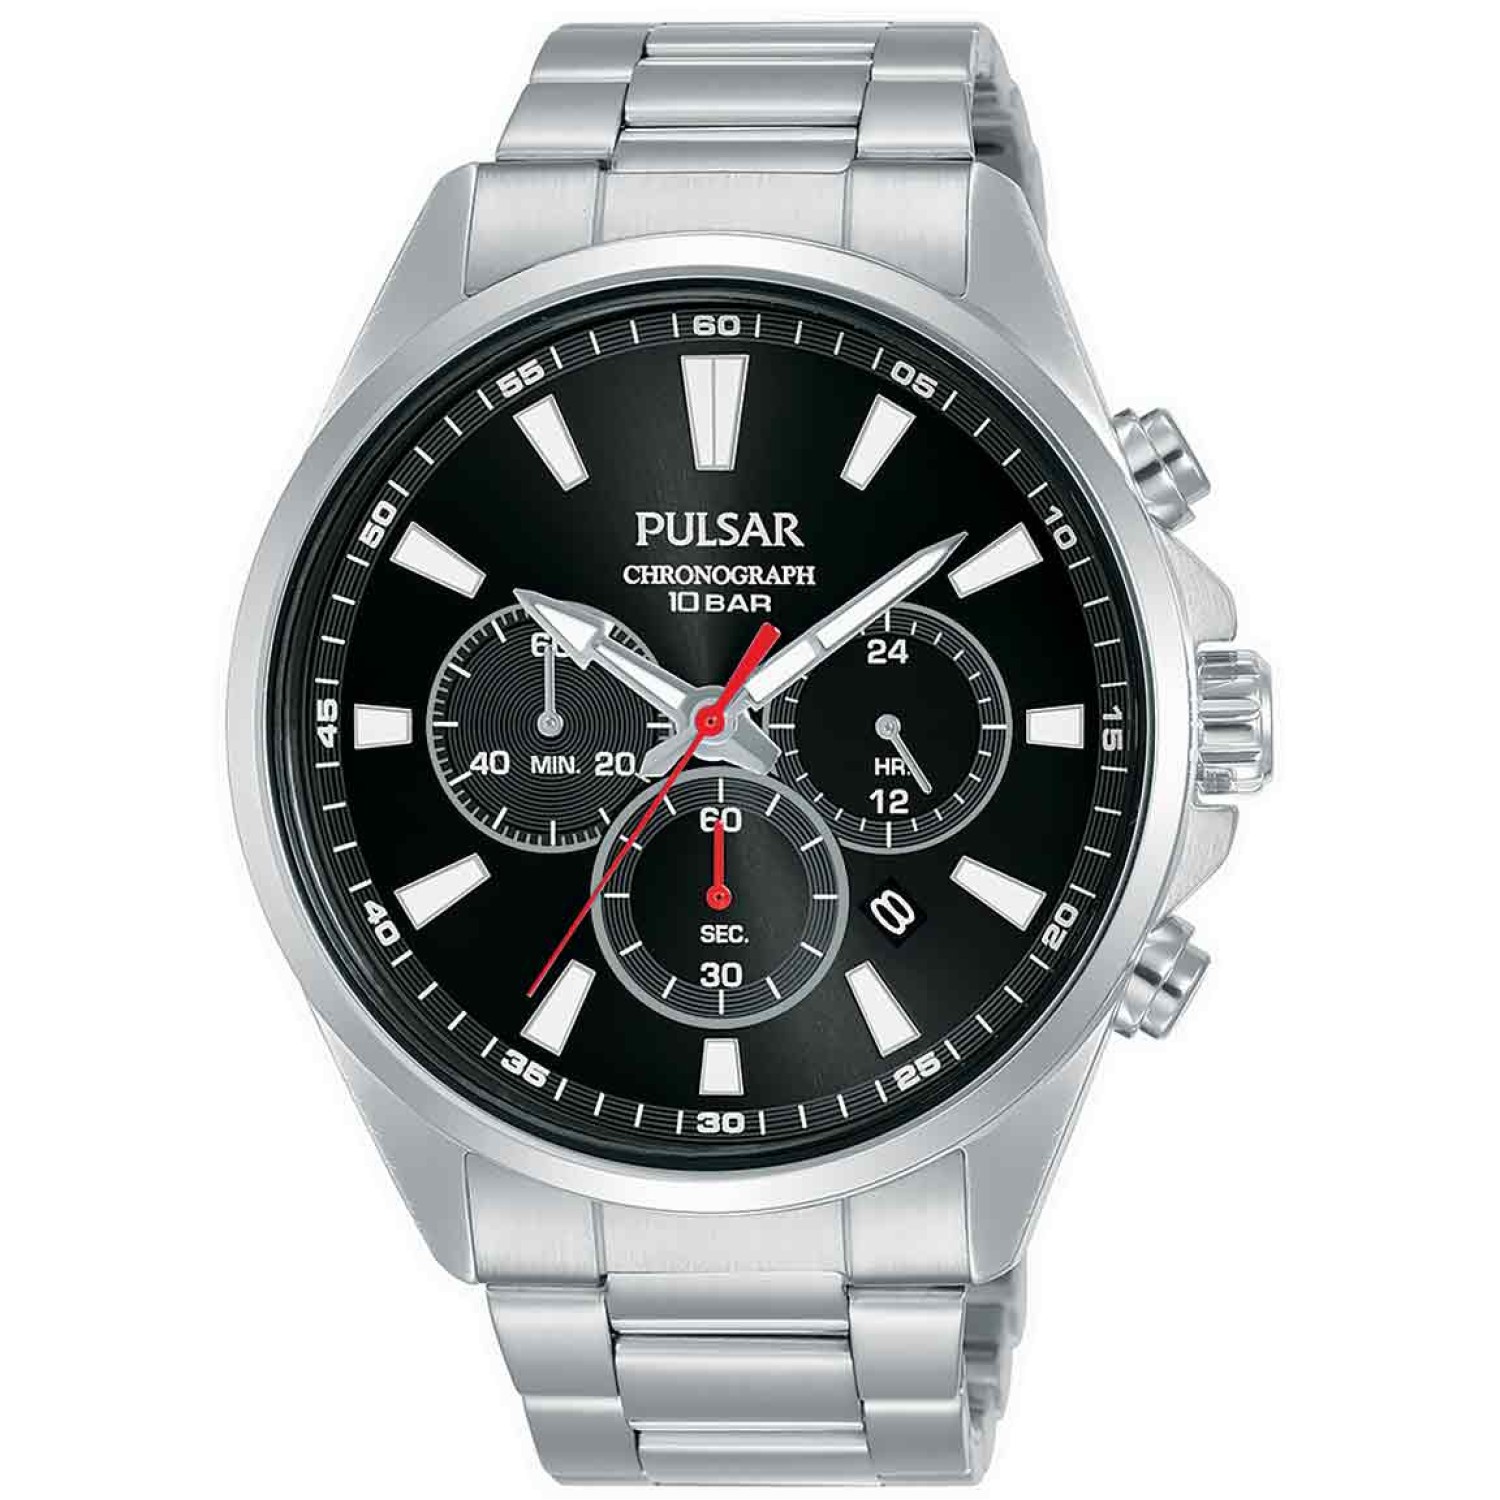 PT3A39X1 PULSAR Chronograph by Seiko Watch. Pulsar Mens 100 metres Stainless Steel Chronograph watch with 100 metres water resistance and a date readout LAYBUY - Pay it easy, in 6 weekly payments and have it now. Only pay the price of your purchase, when 